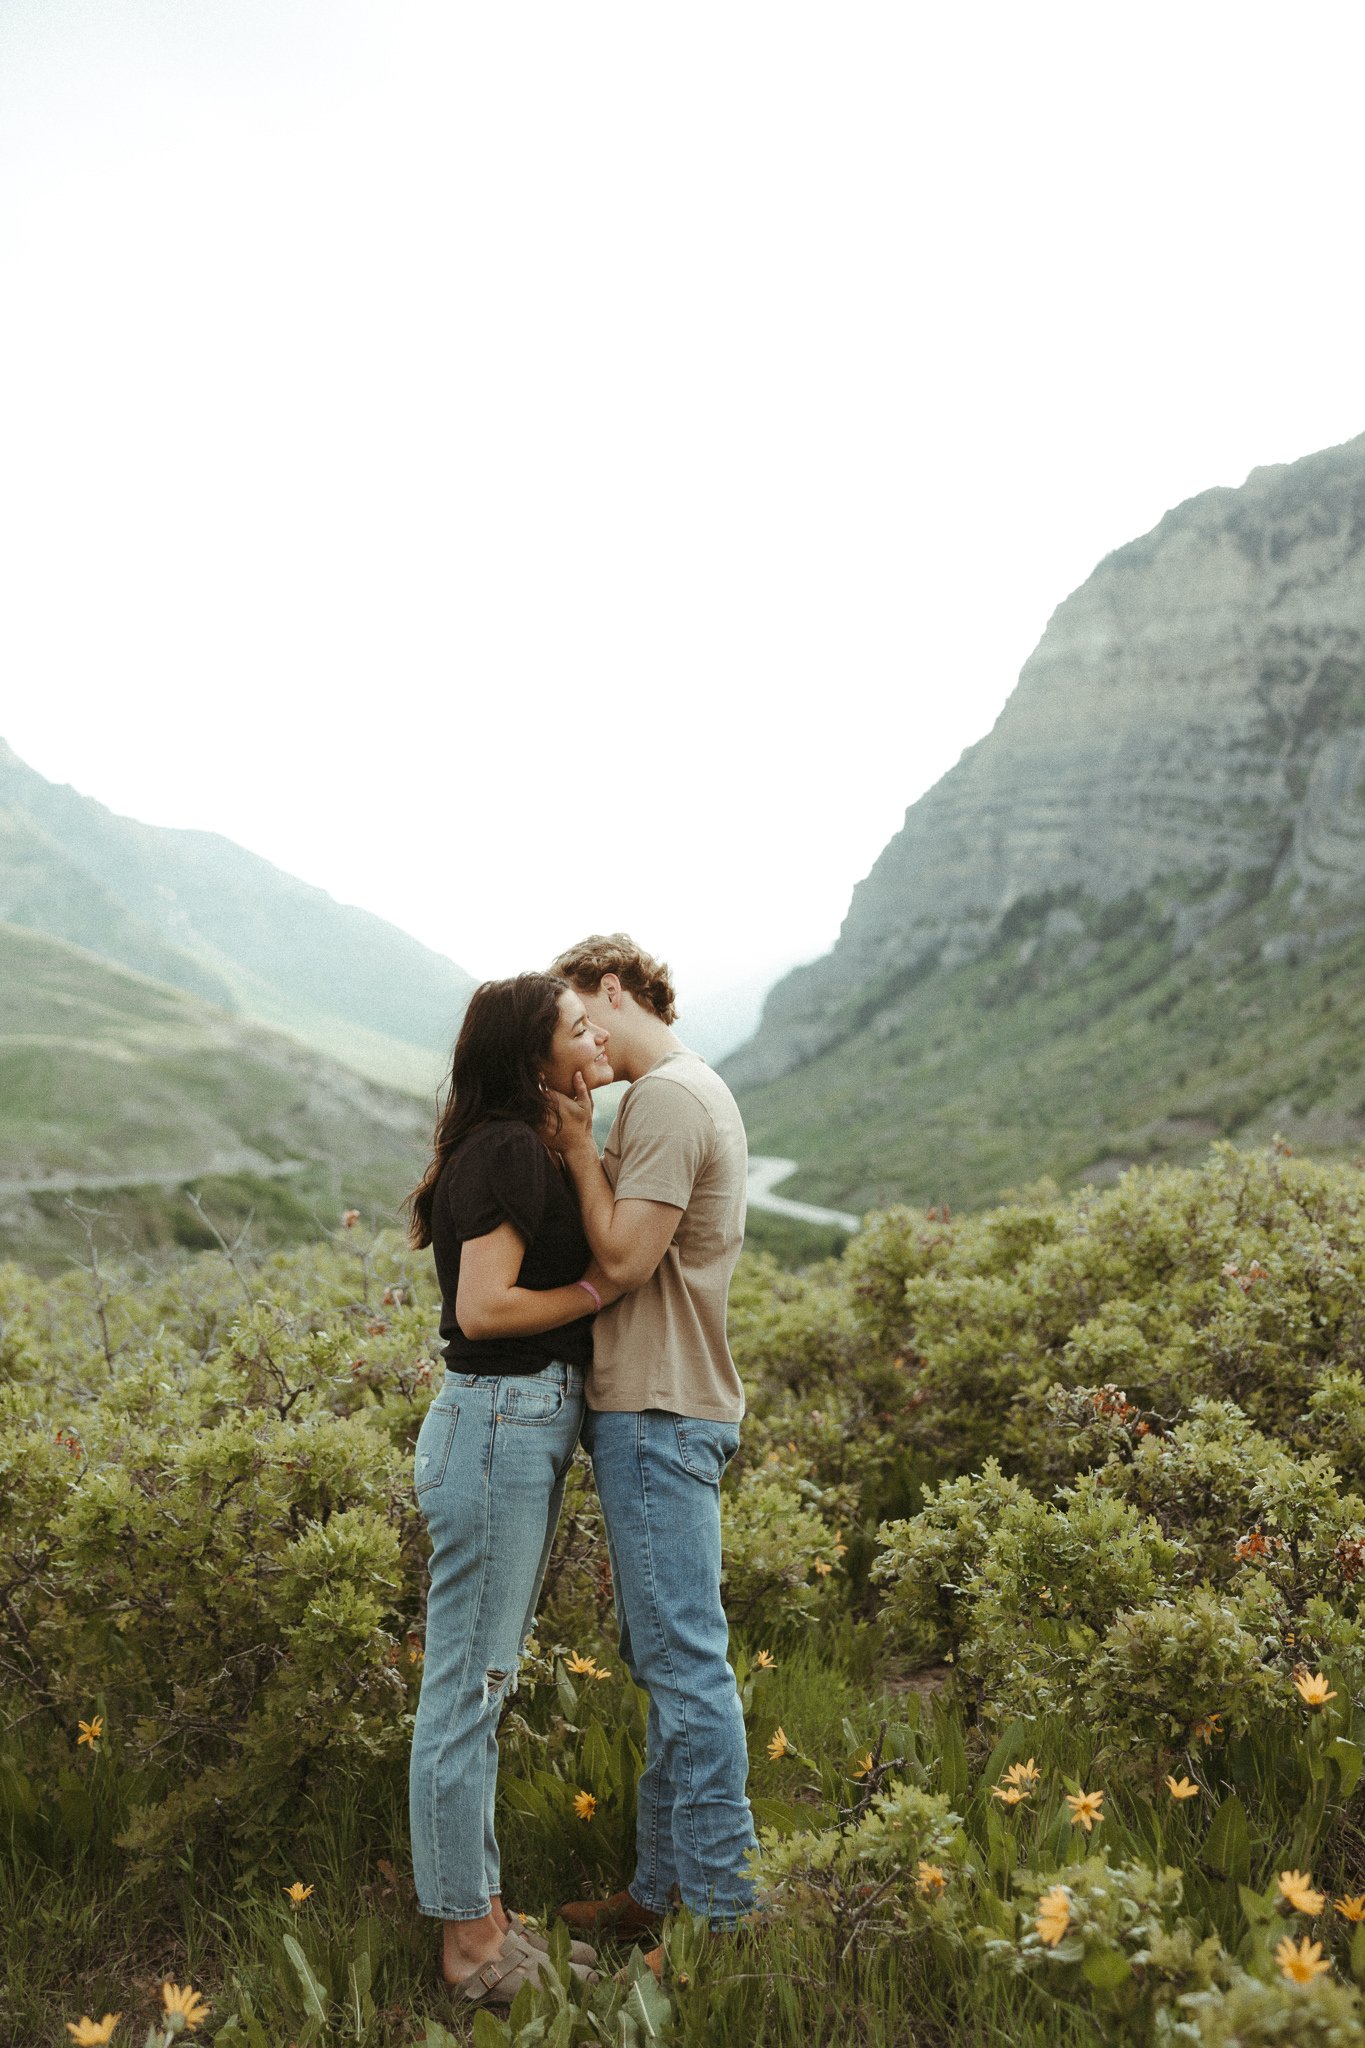 Spring-Provo-Canyon-Wildflowers-Engagement-Session-56